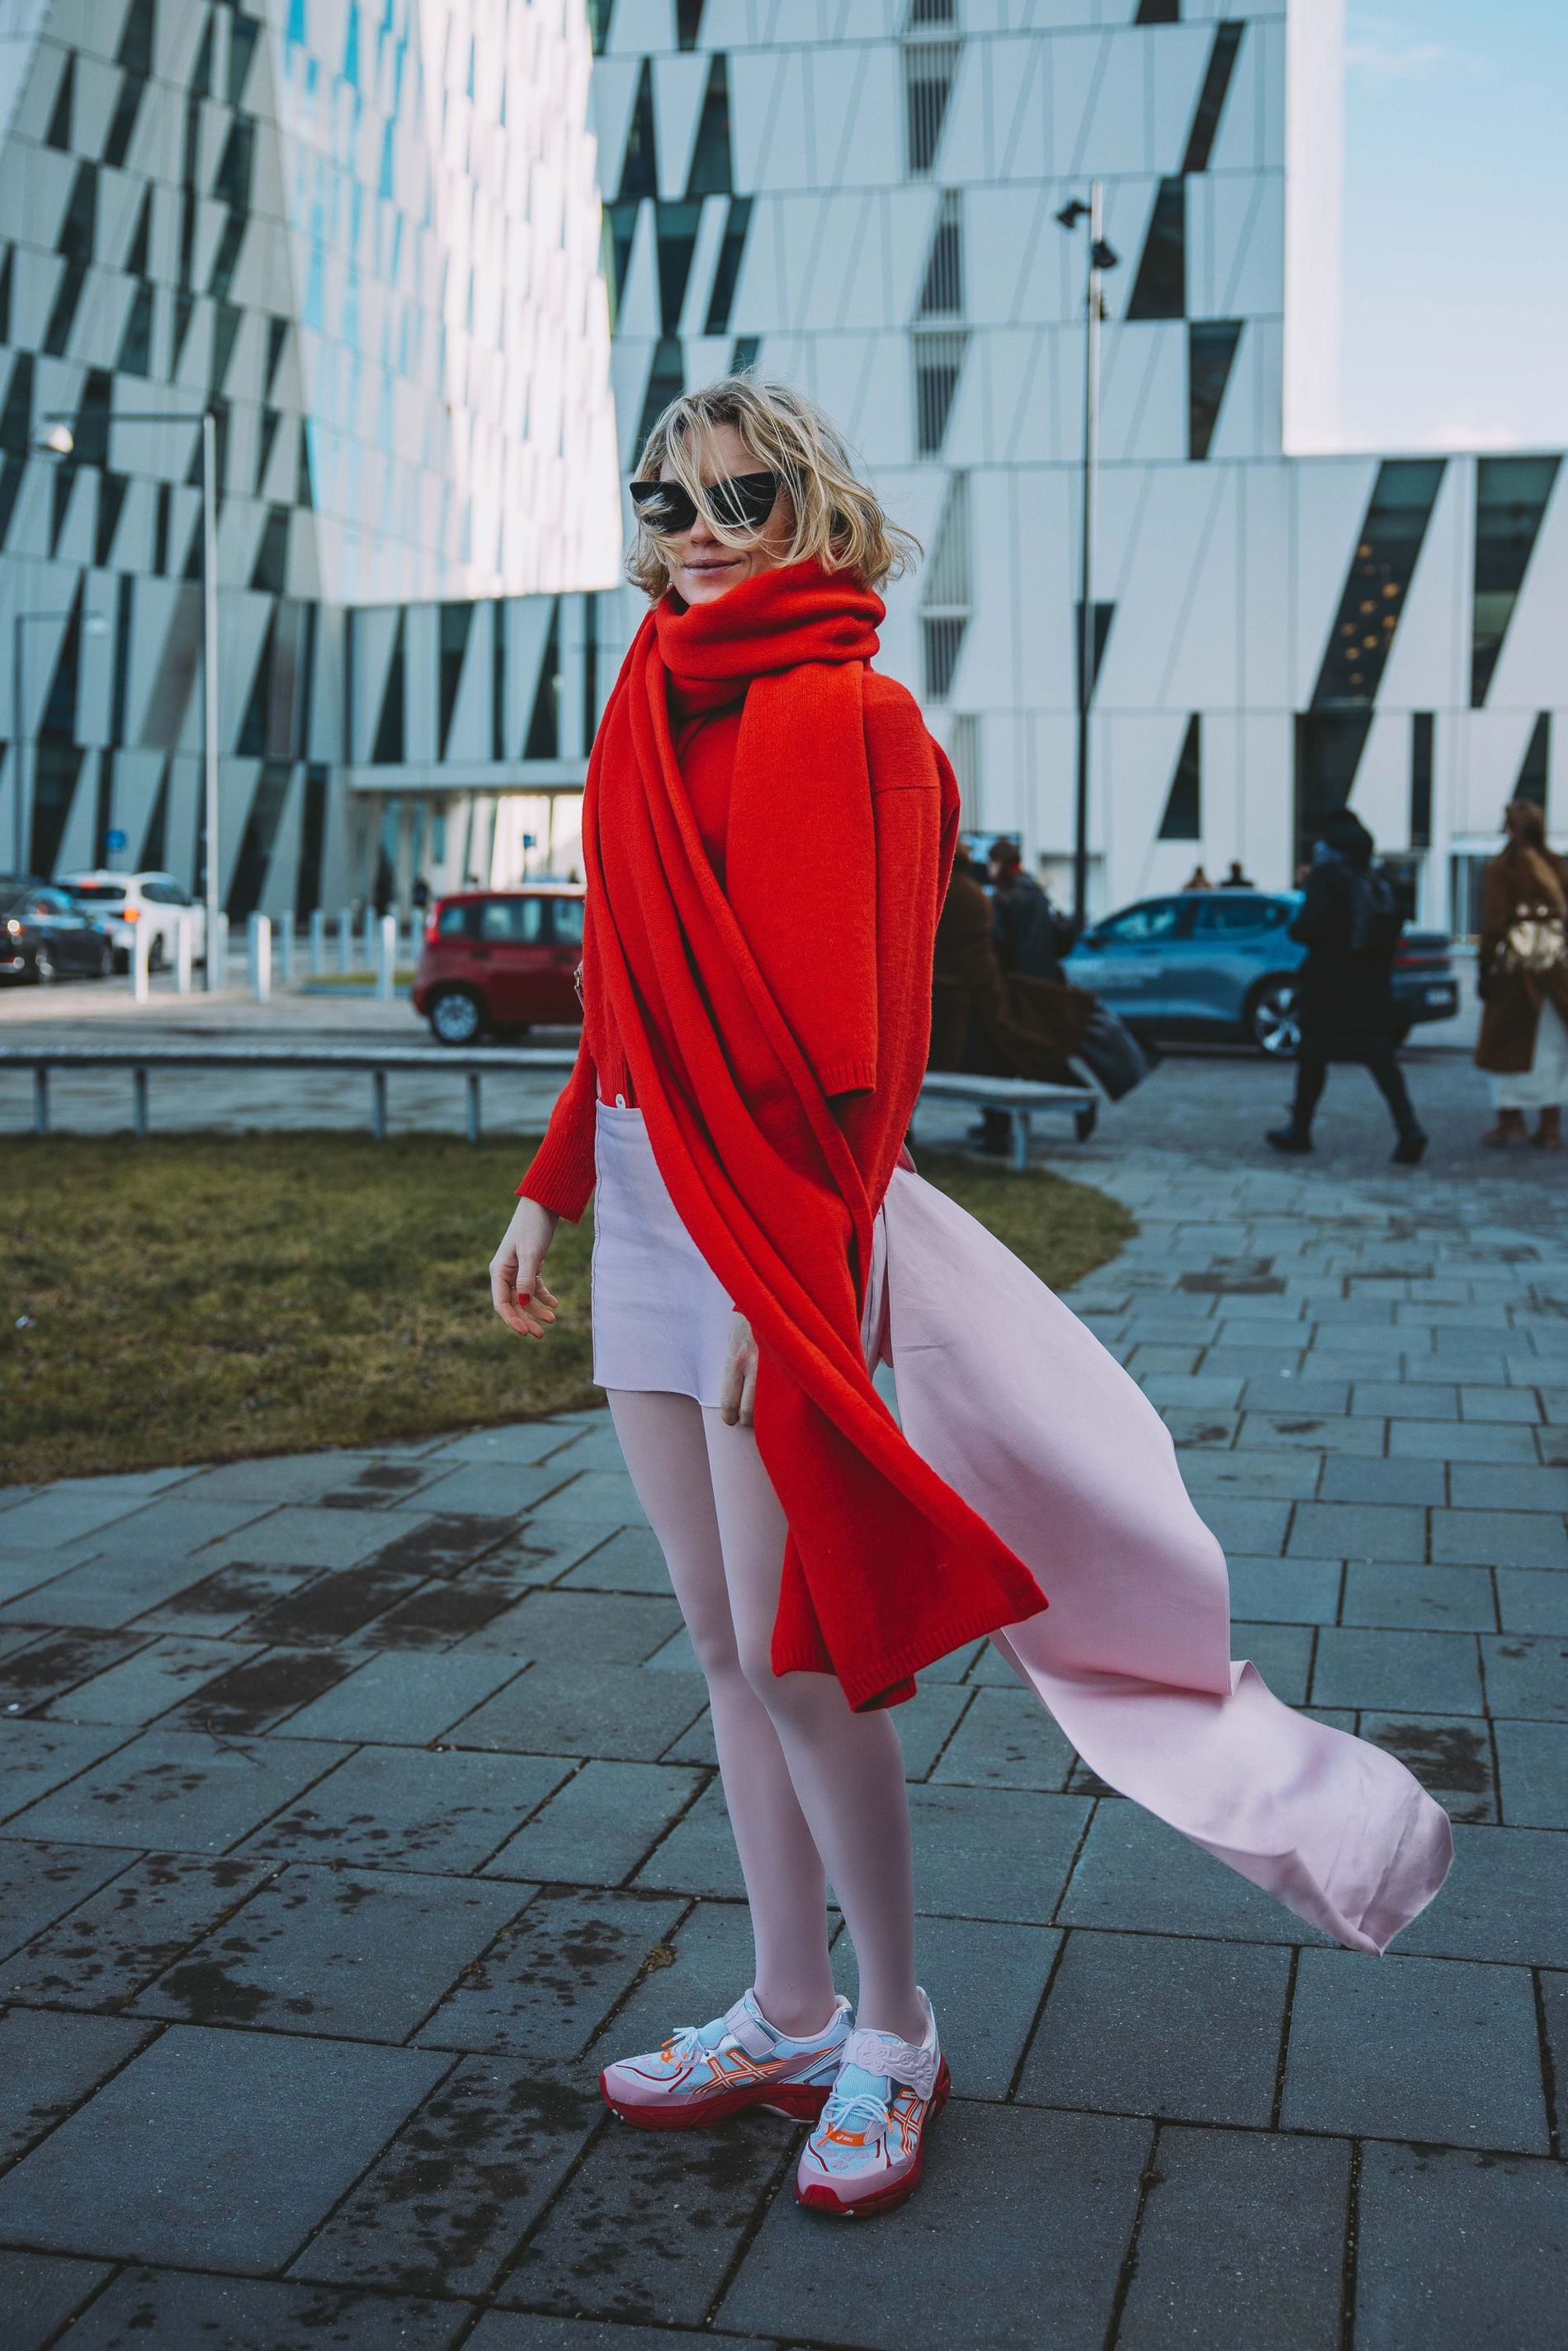 A guest at CPHFW poses for a street style photo wearing a red scarf and knit sweater matched with a powder pink skirt and pink stockings